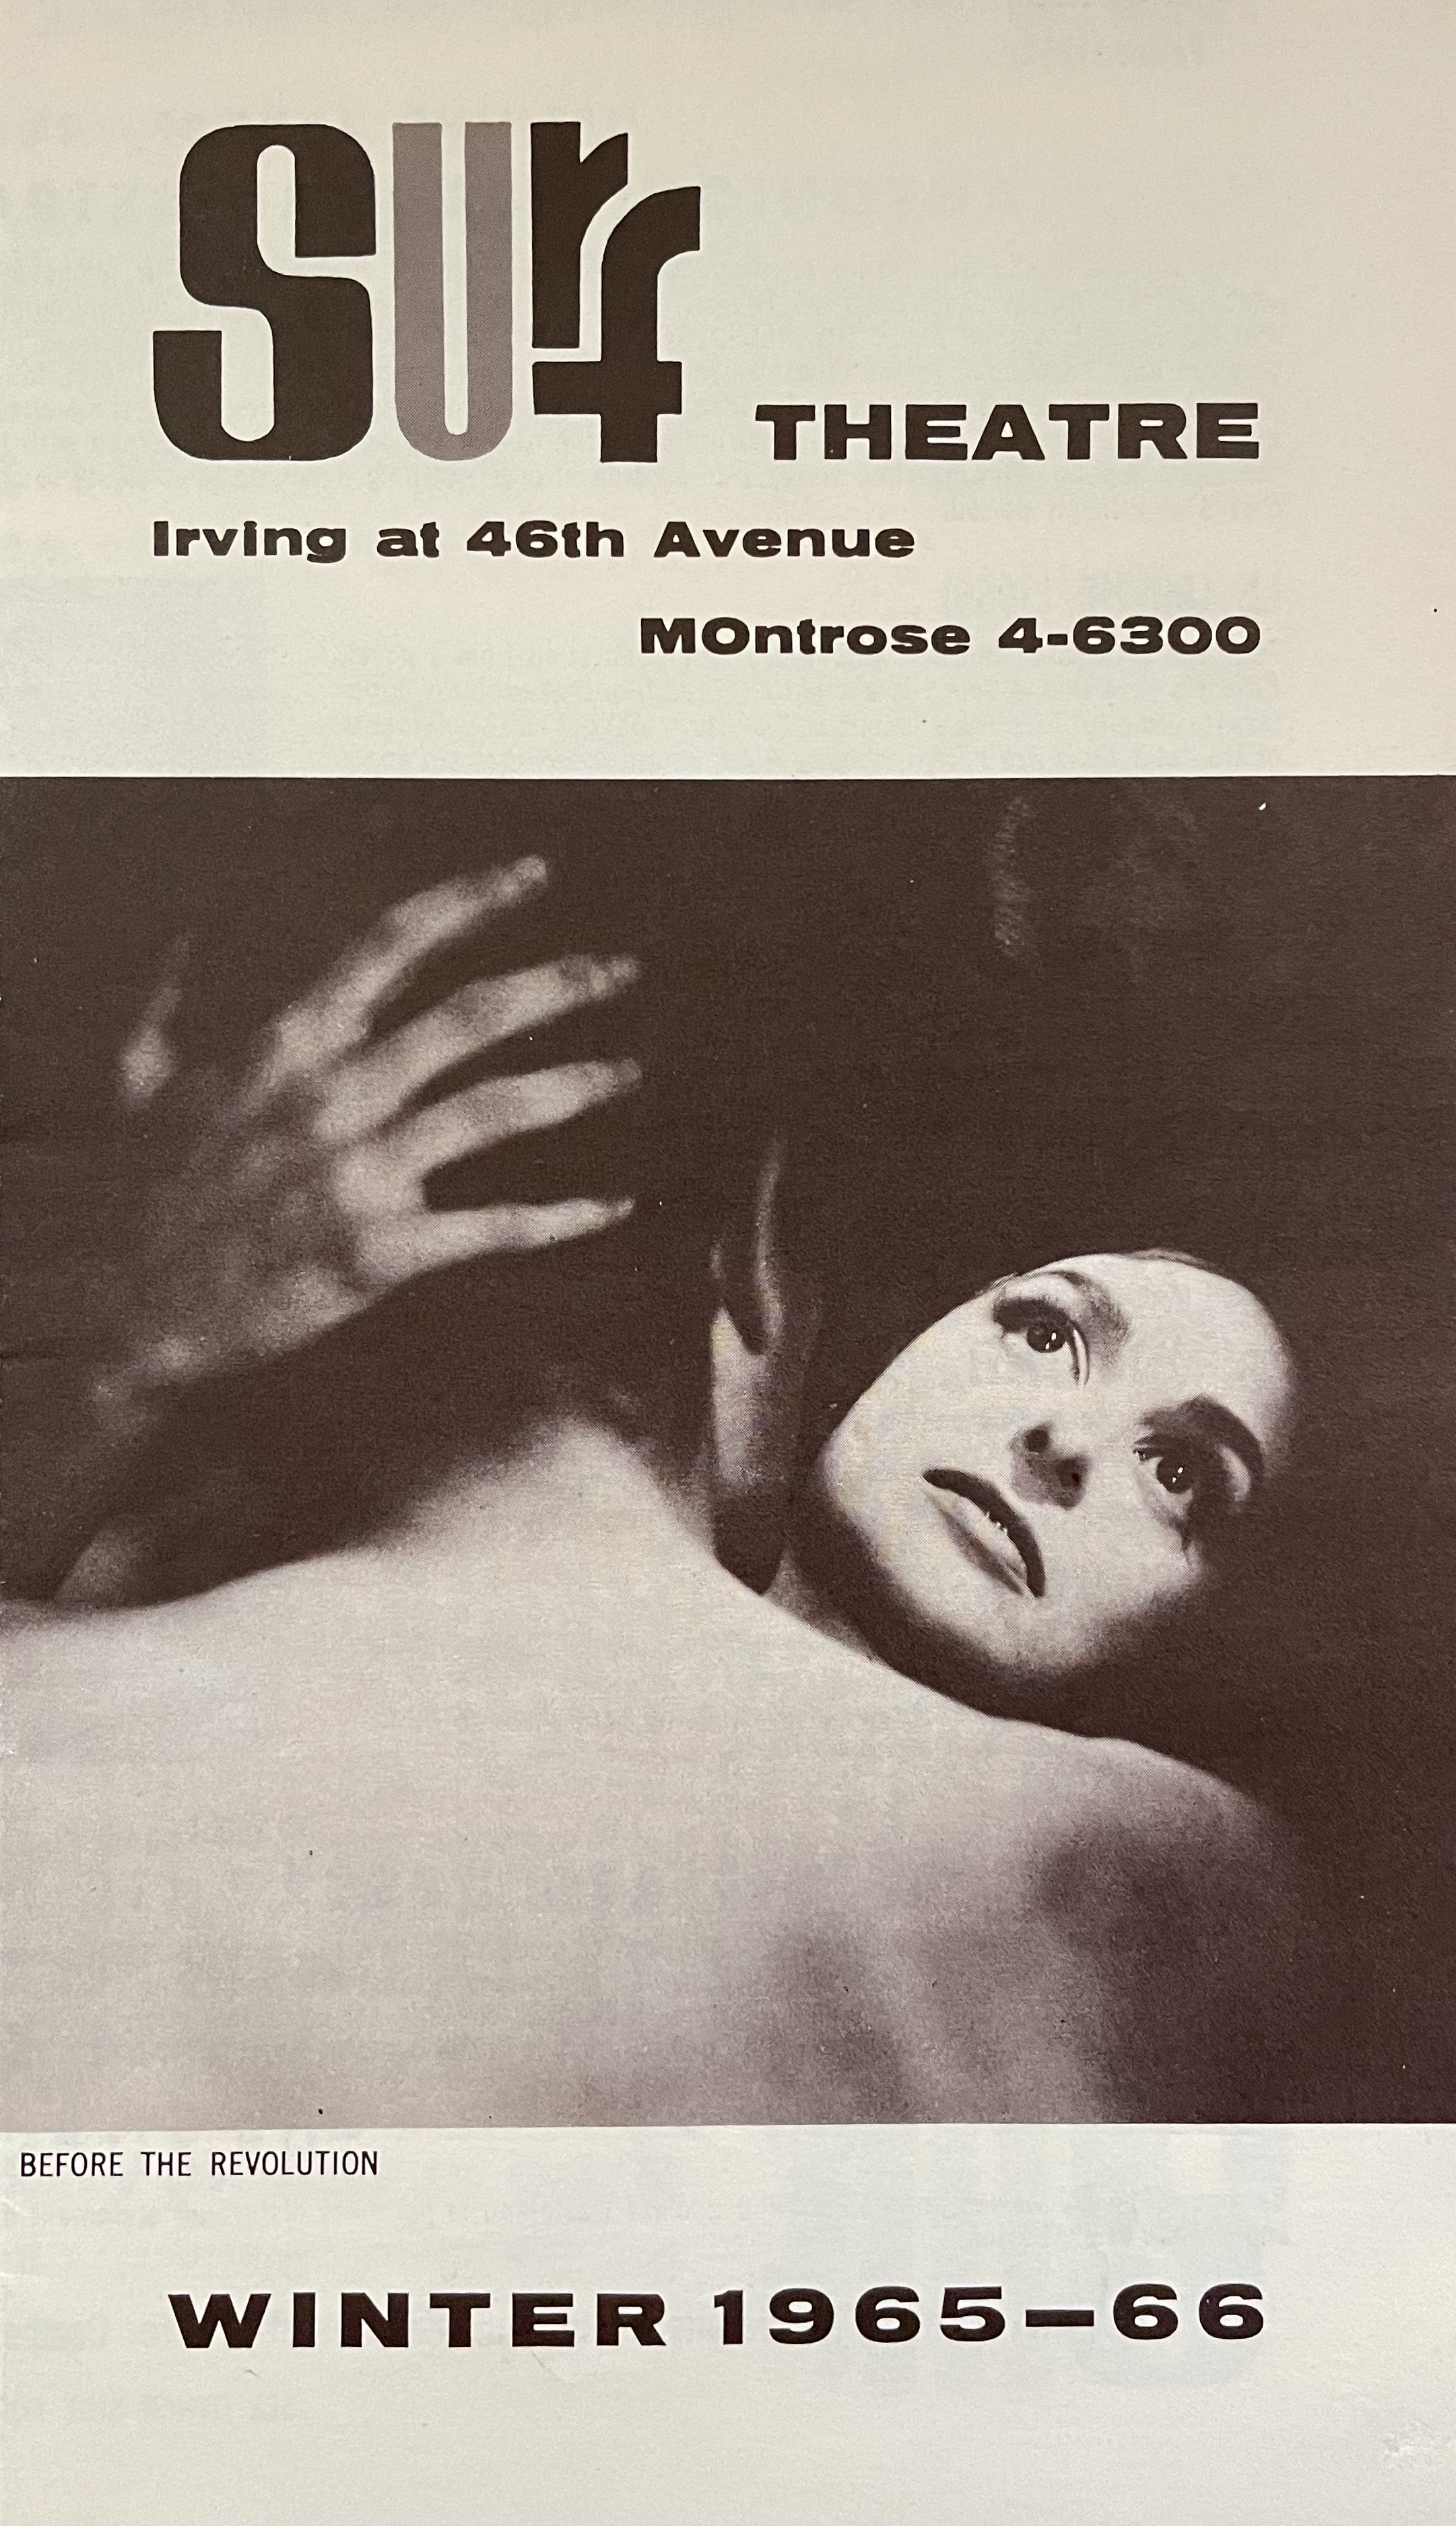 Cover to the 1965-66 Winter screening program for the Surf Theatre in San Francisco